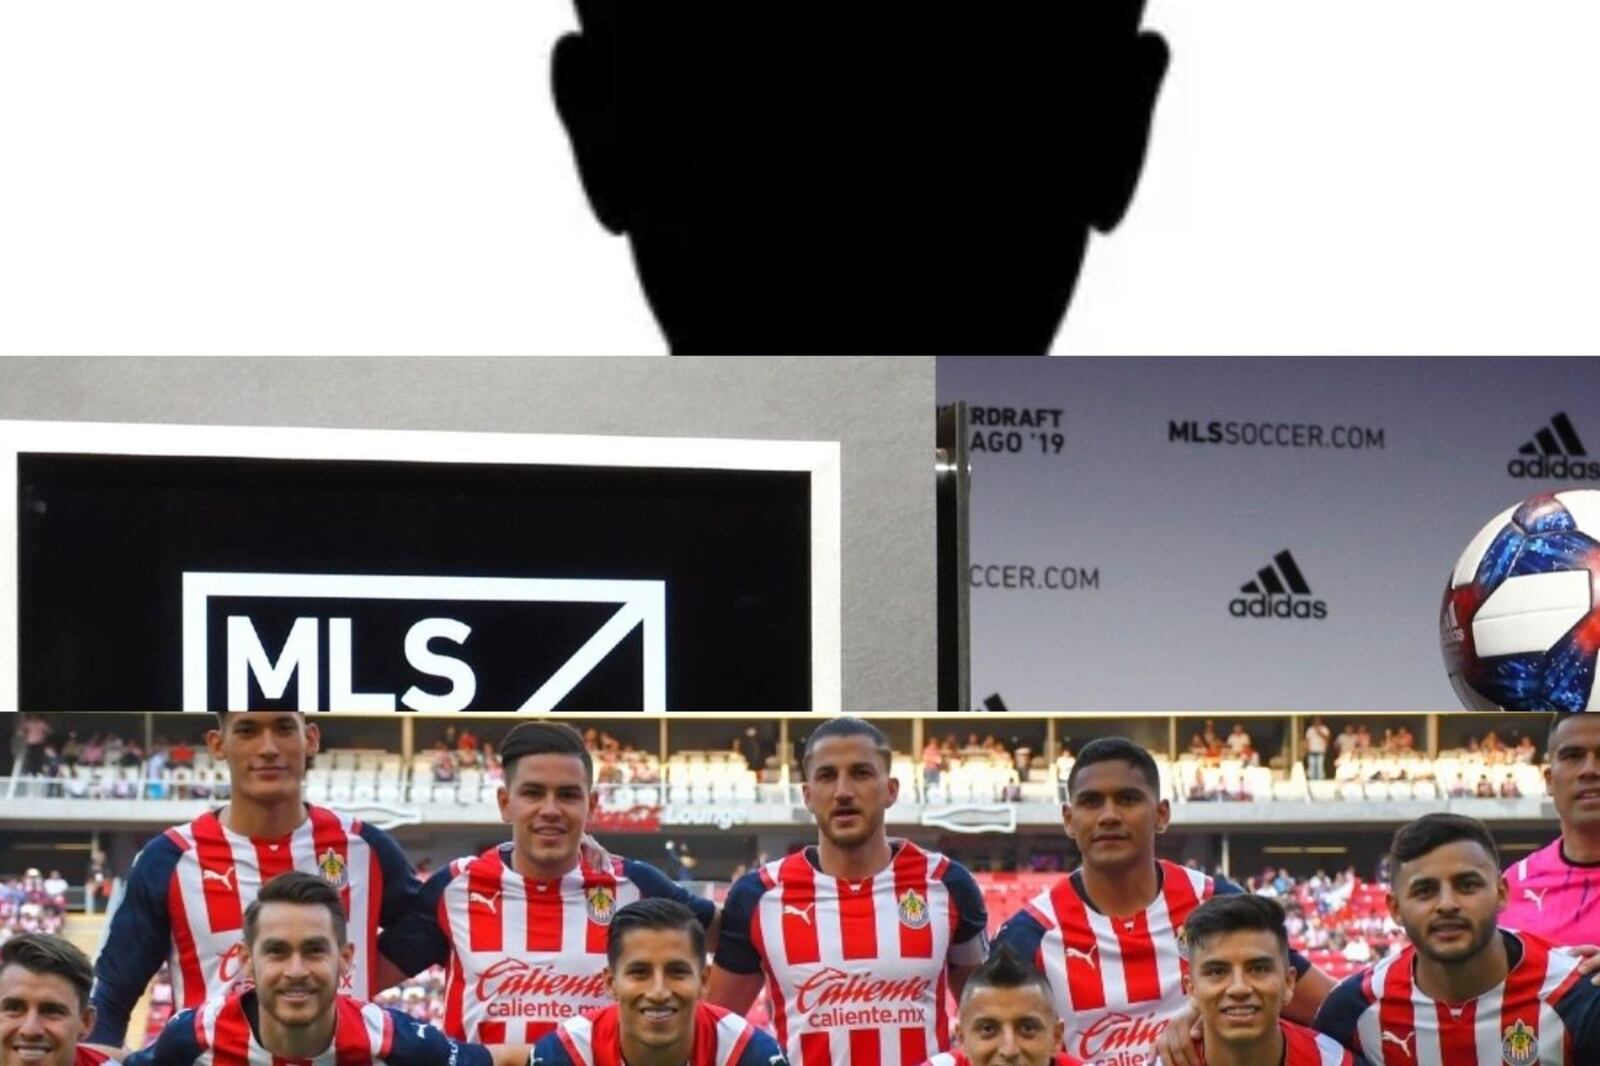 Chivas wanted to end his career and now he is a star in an MLS club